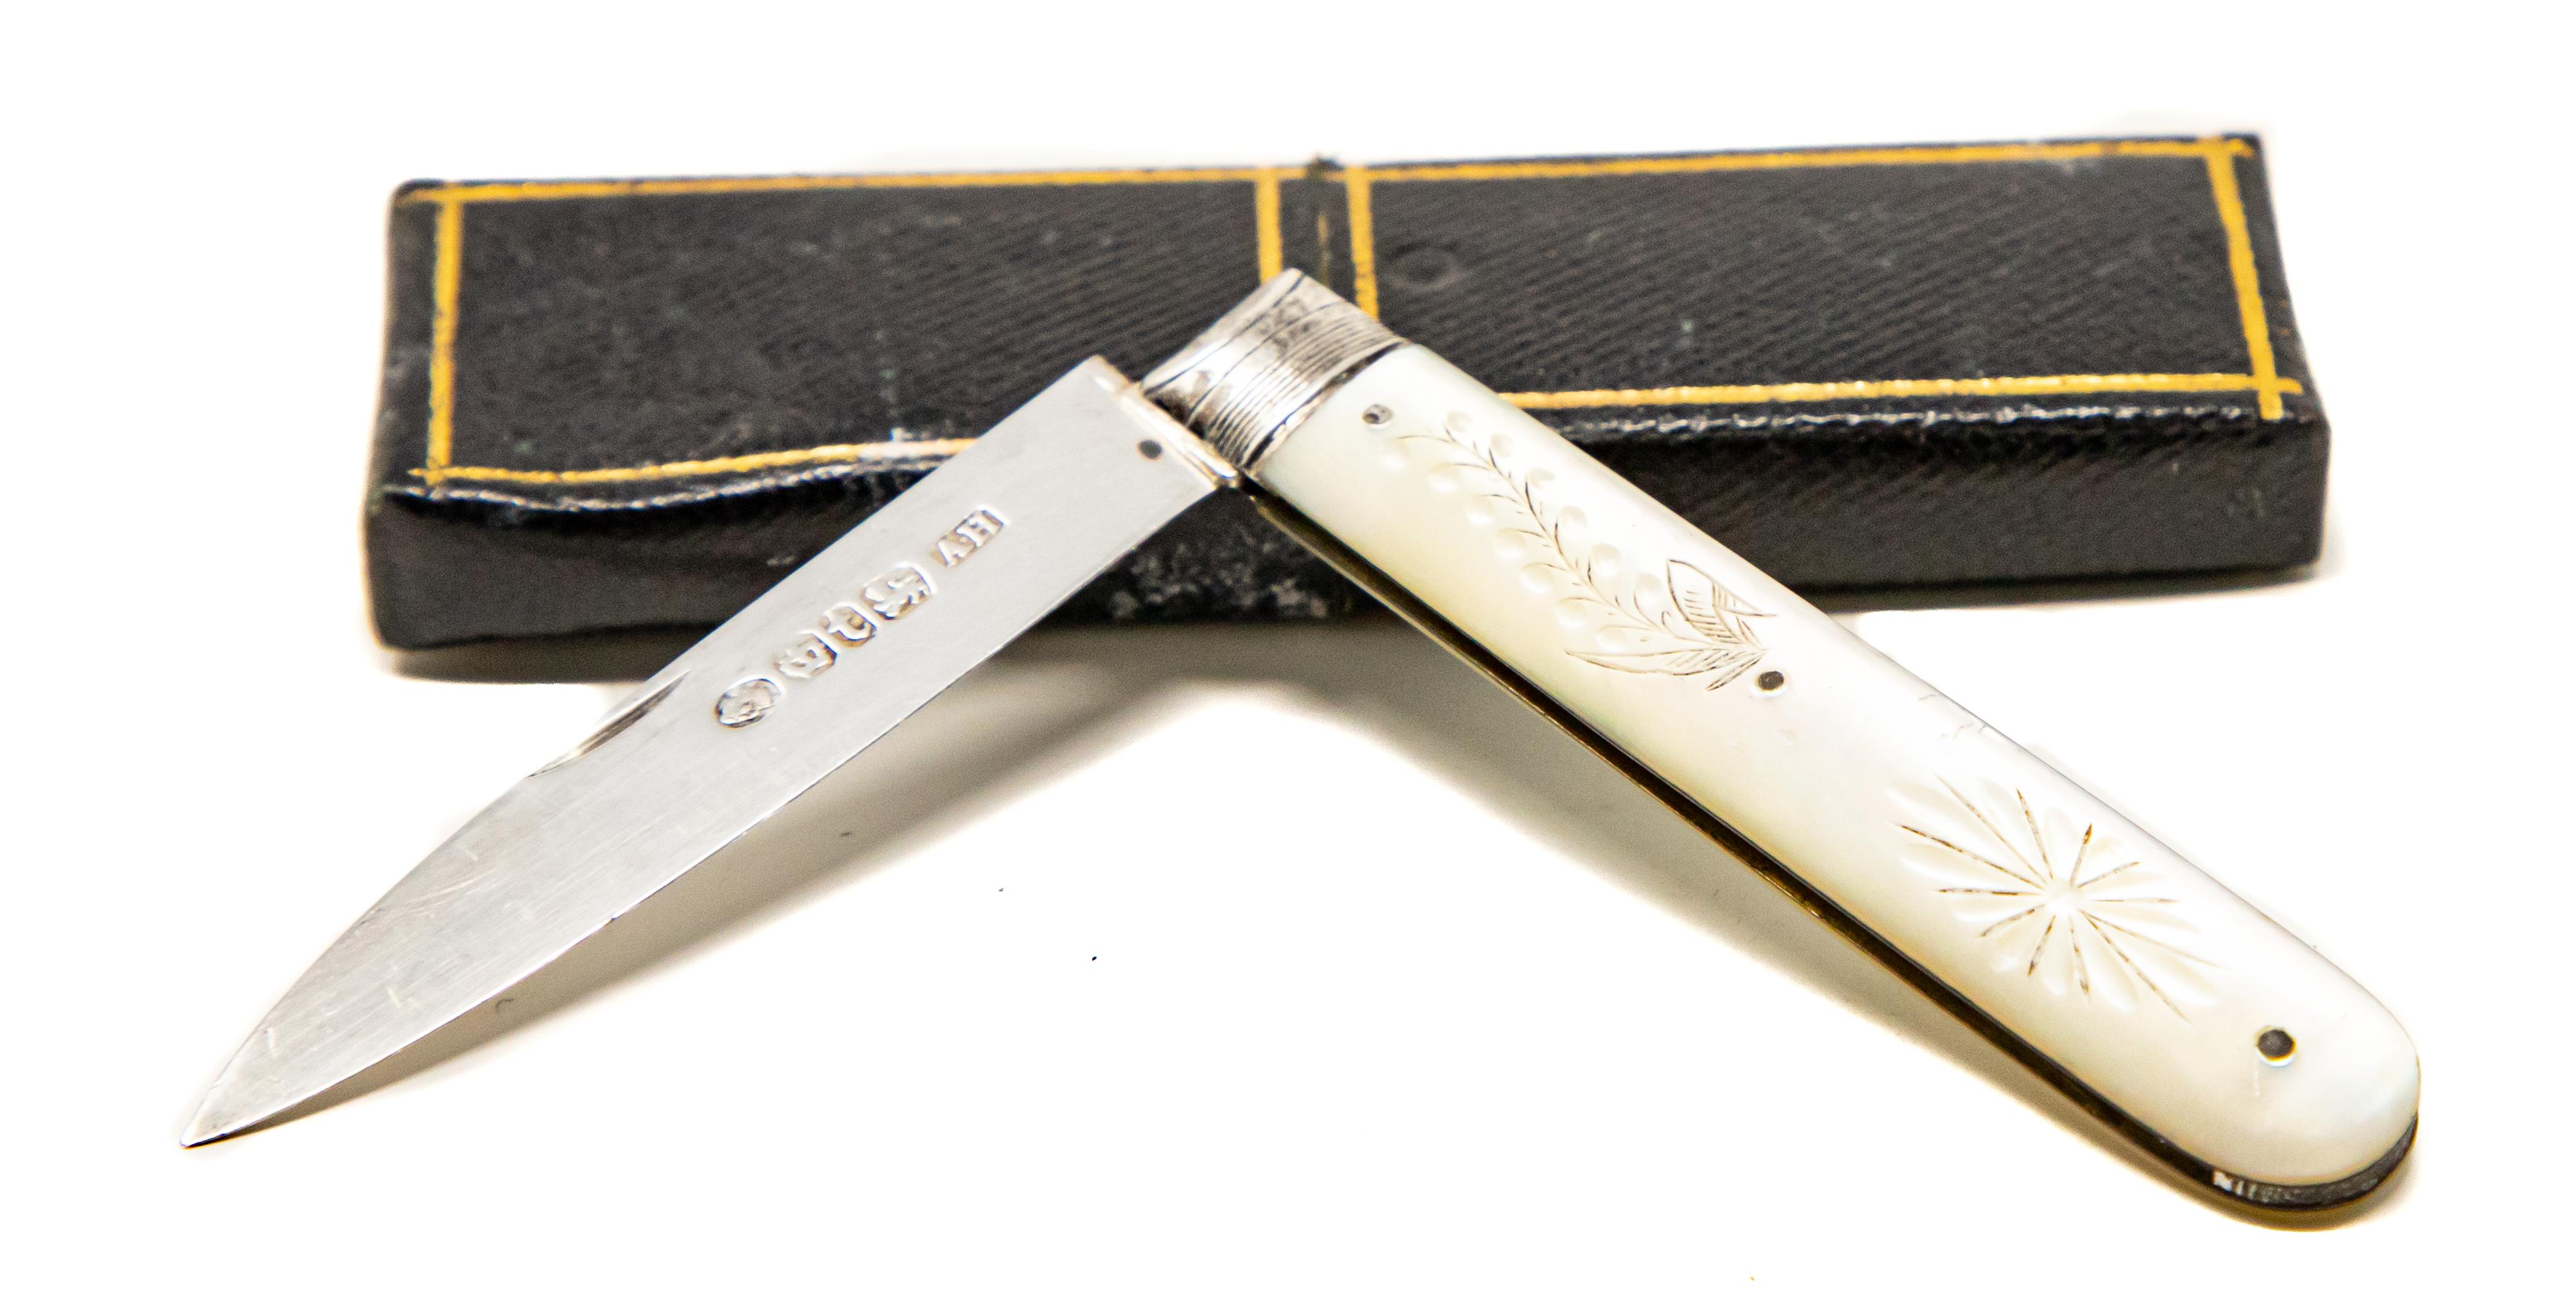 Offering this stunning mother of pearl pocket knife. The handle is mother of pearl with floral and foliate designs to one end and a sunburst on the other. The blade is hallmarked, believed to be from Sheffield, England.